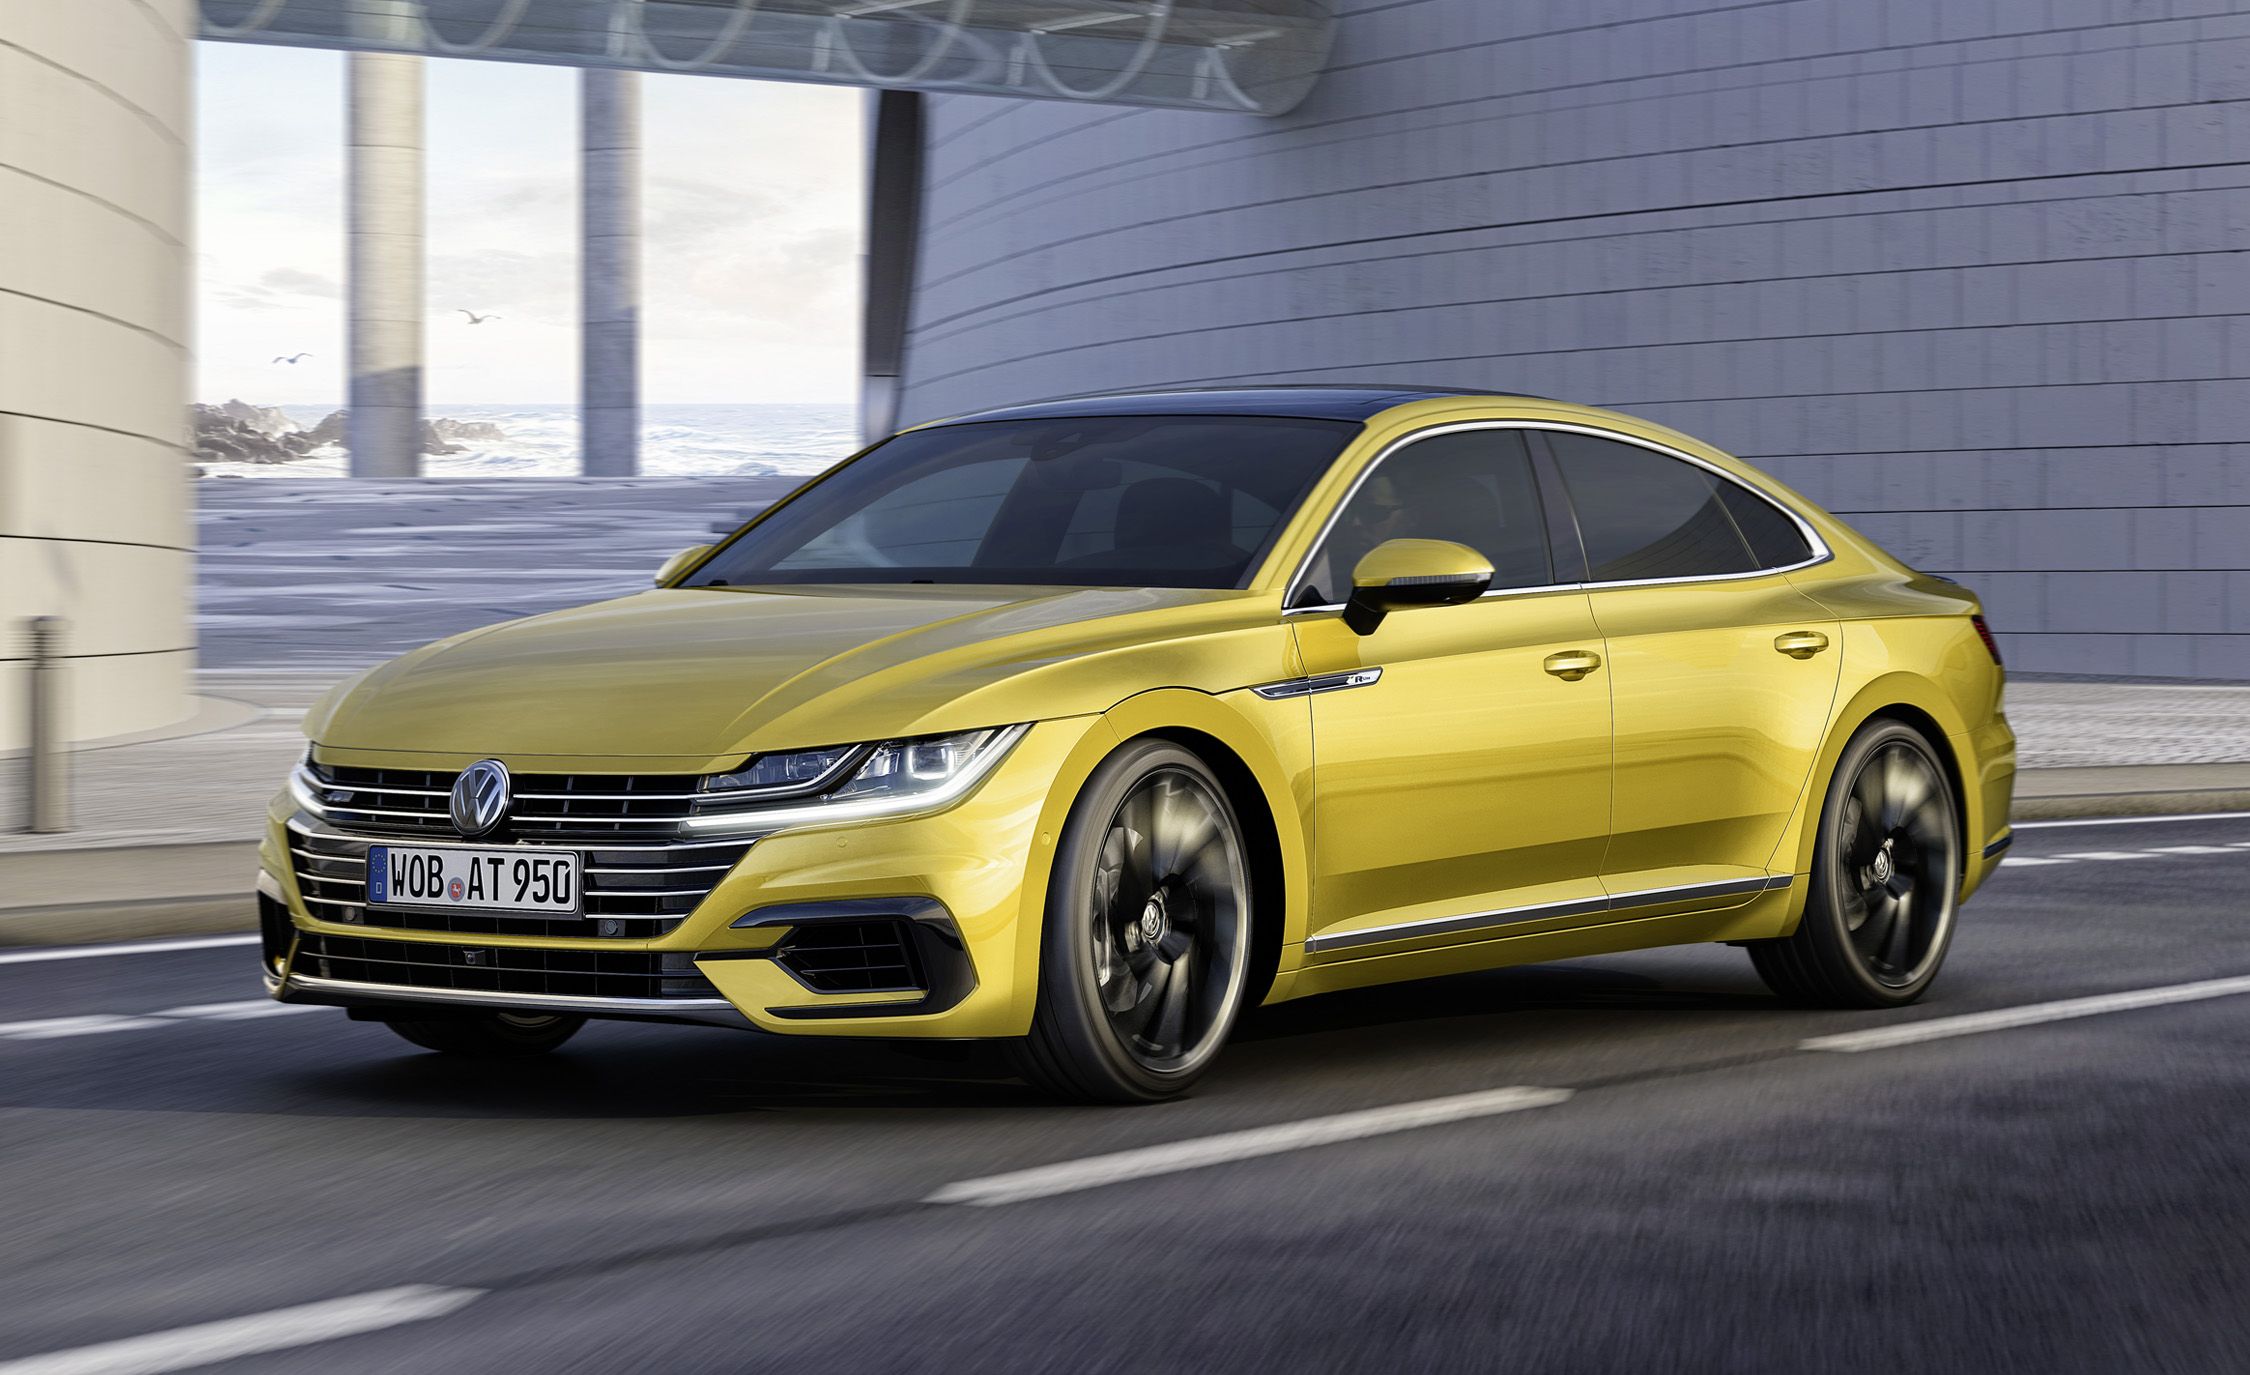 2018 Volkswagen Arteon Photos and Info | News | Car and Driver